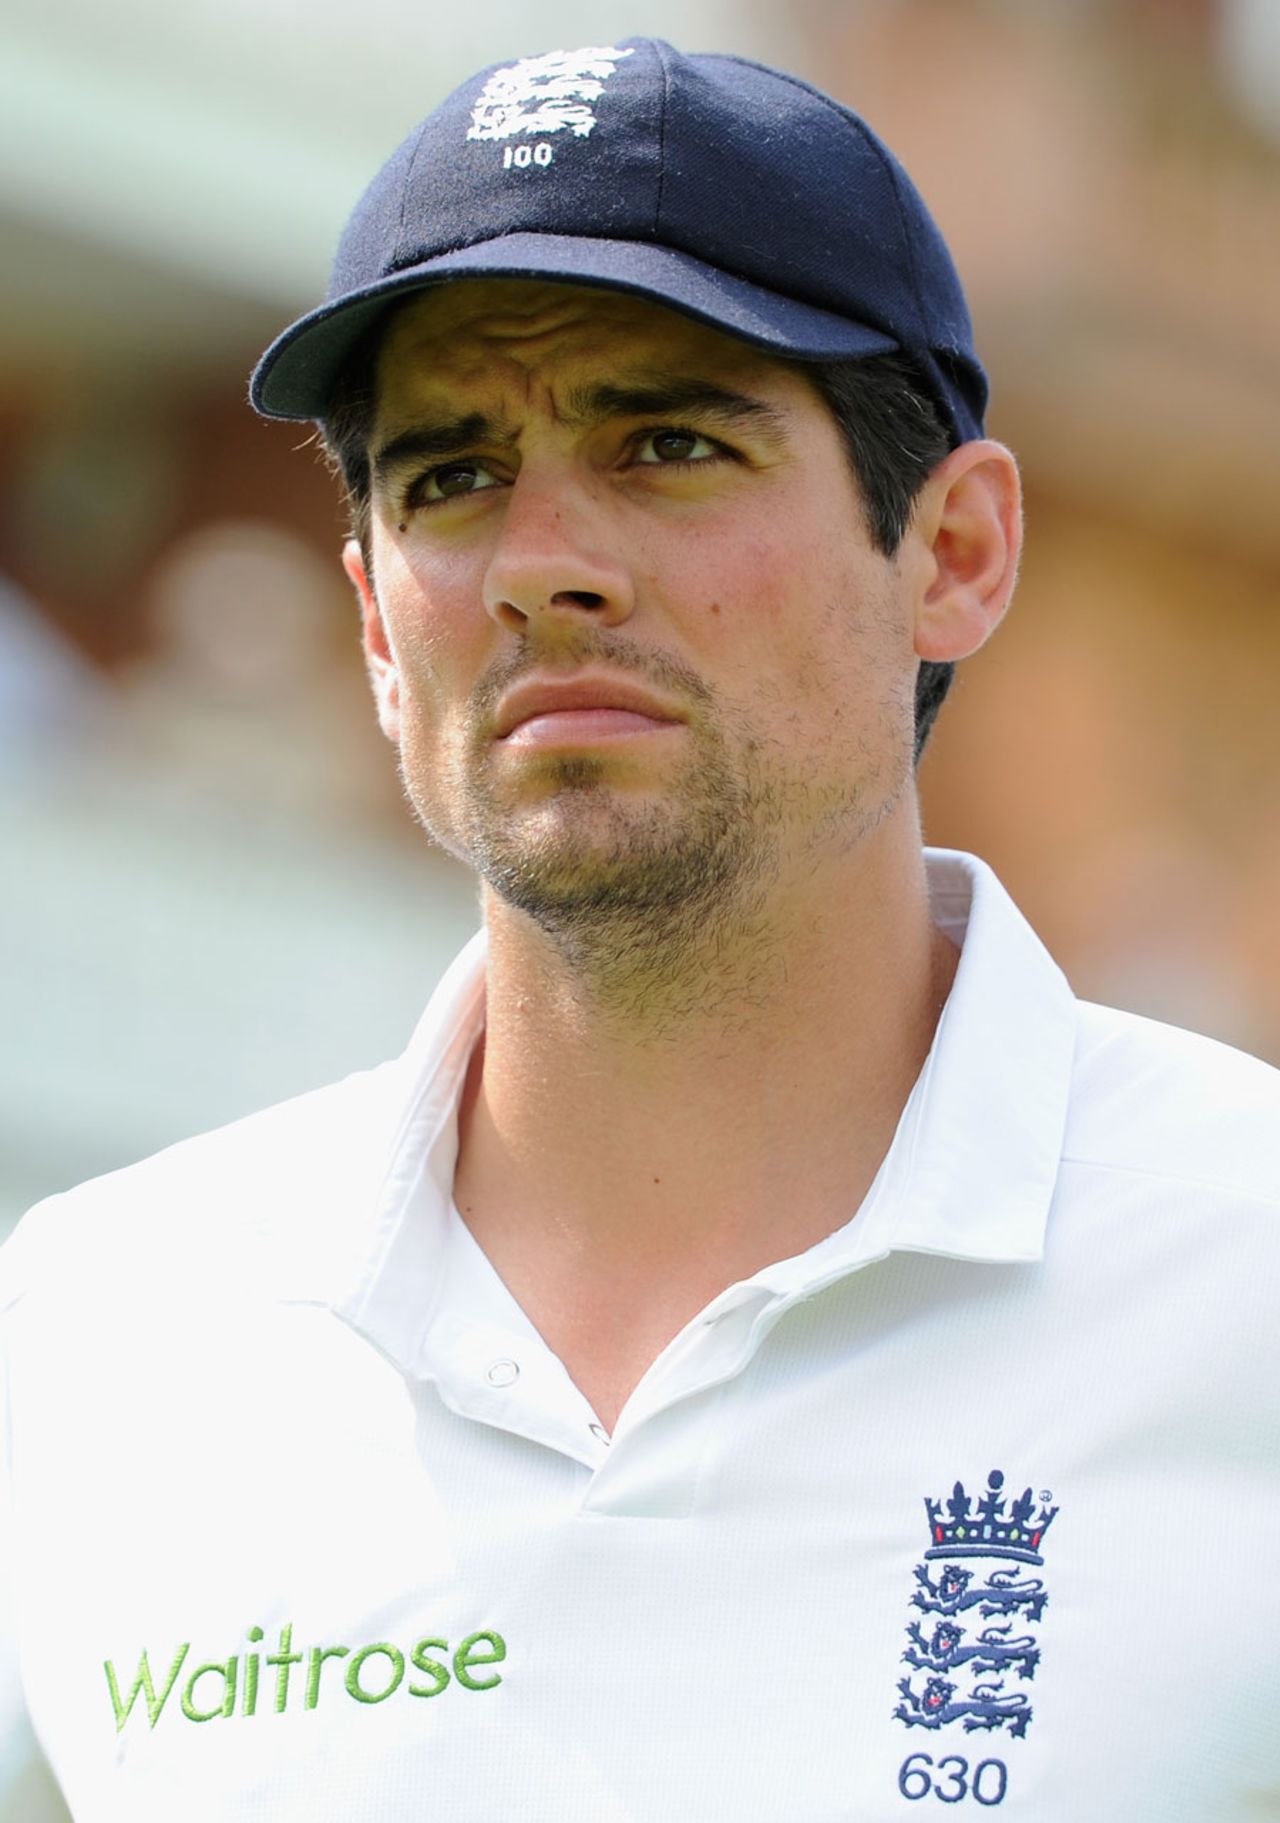 It was another tough post-match debriefing for Alastair Cook, England v India, 2nd Investec Test, Lord's, 5th day, July 21, 2014